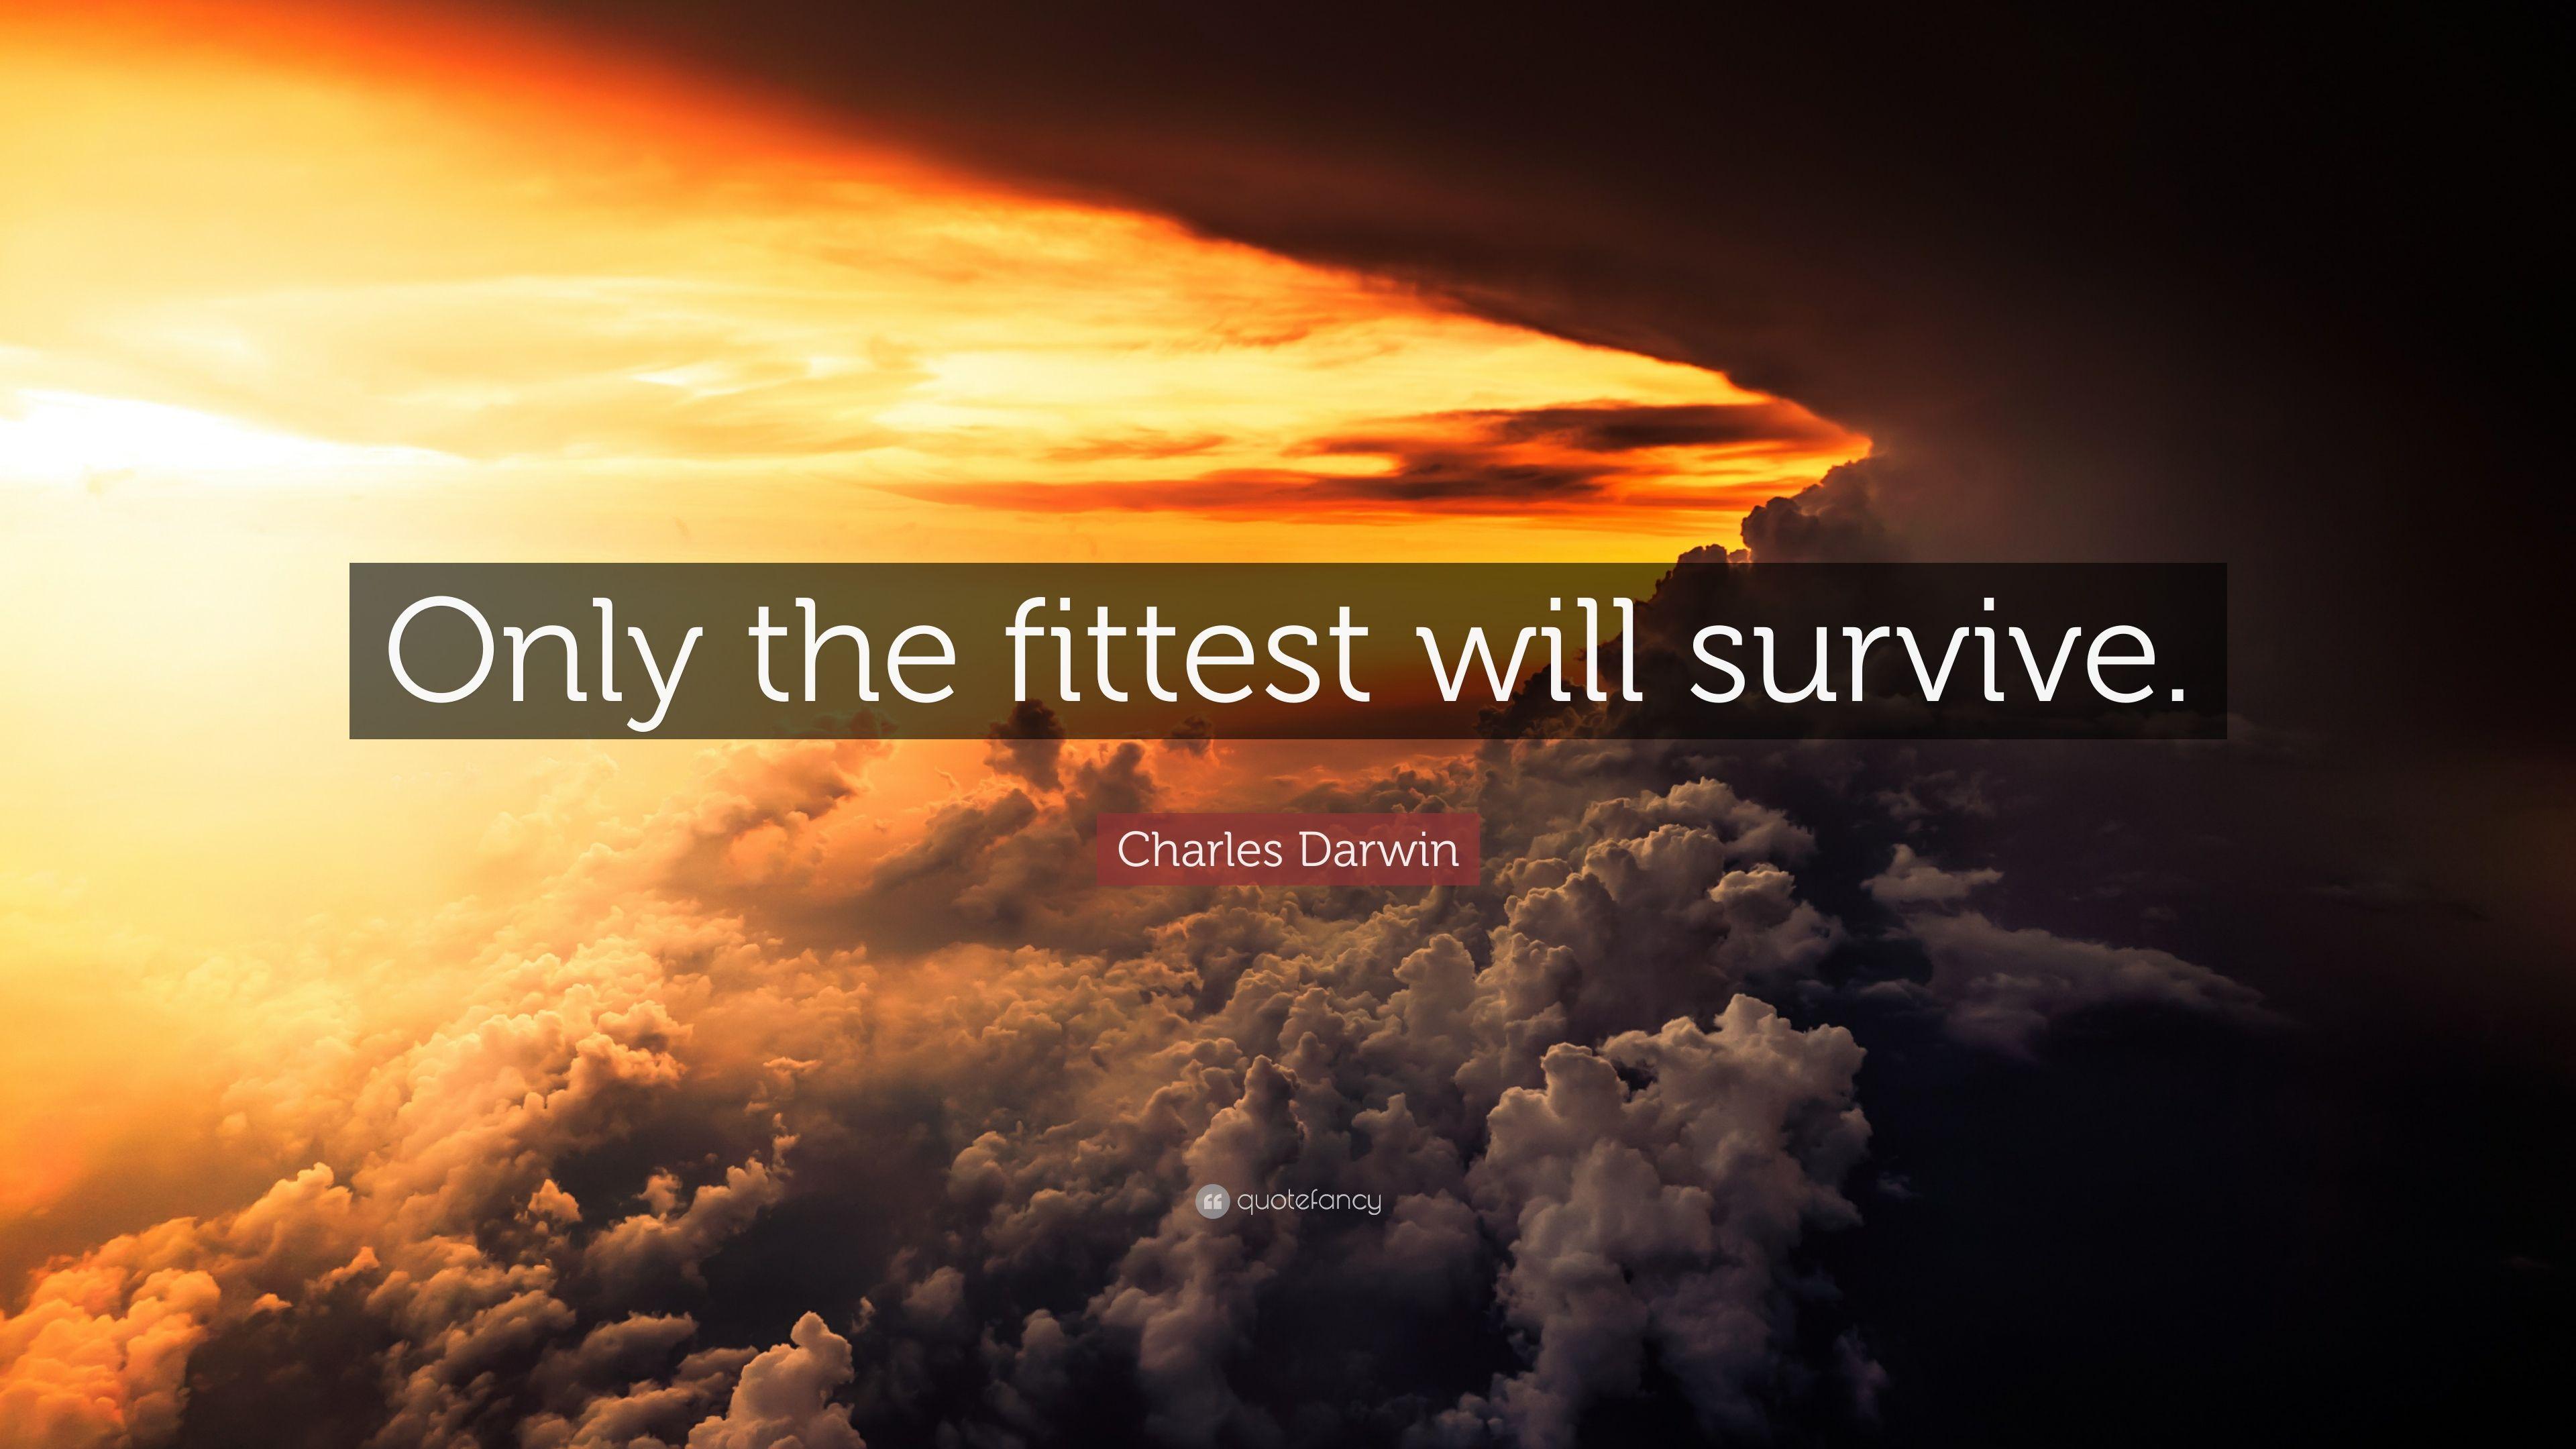 Charles Darwin Quote: “Only the fittest will survive.” 12